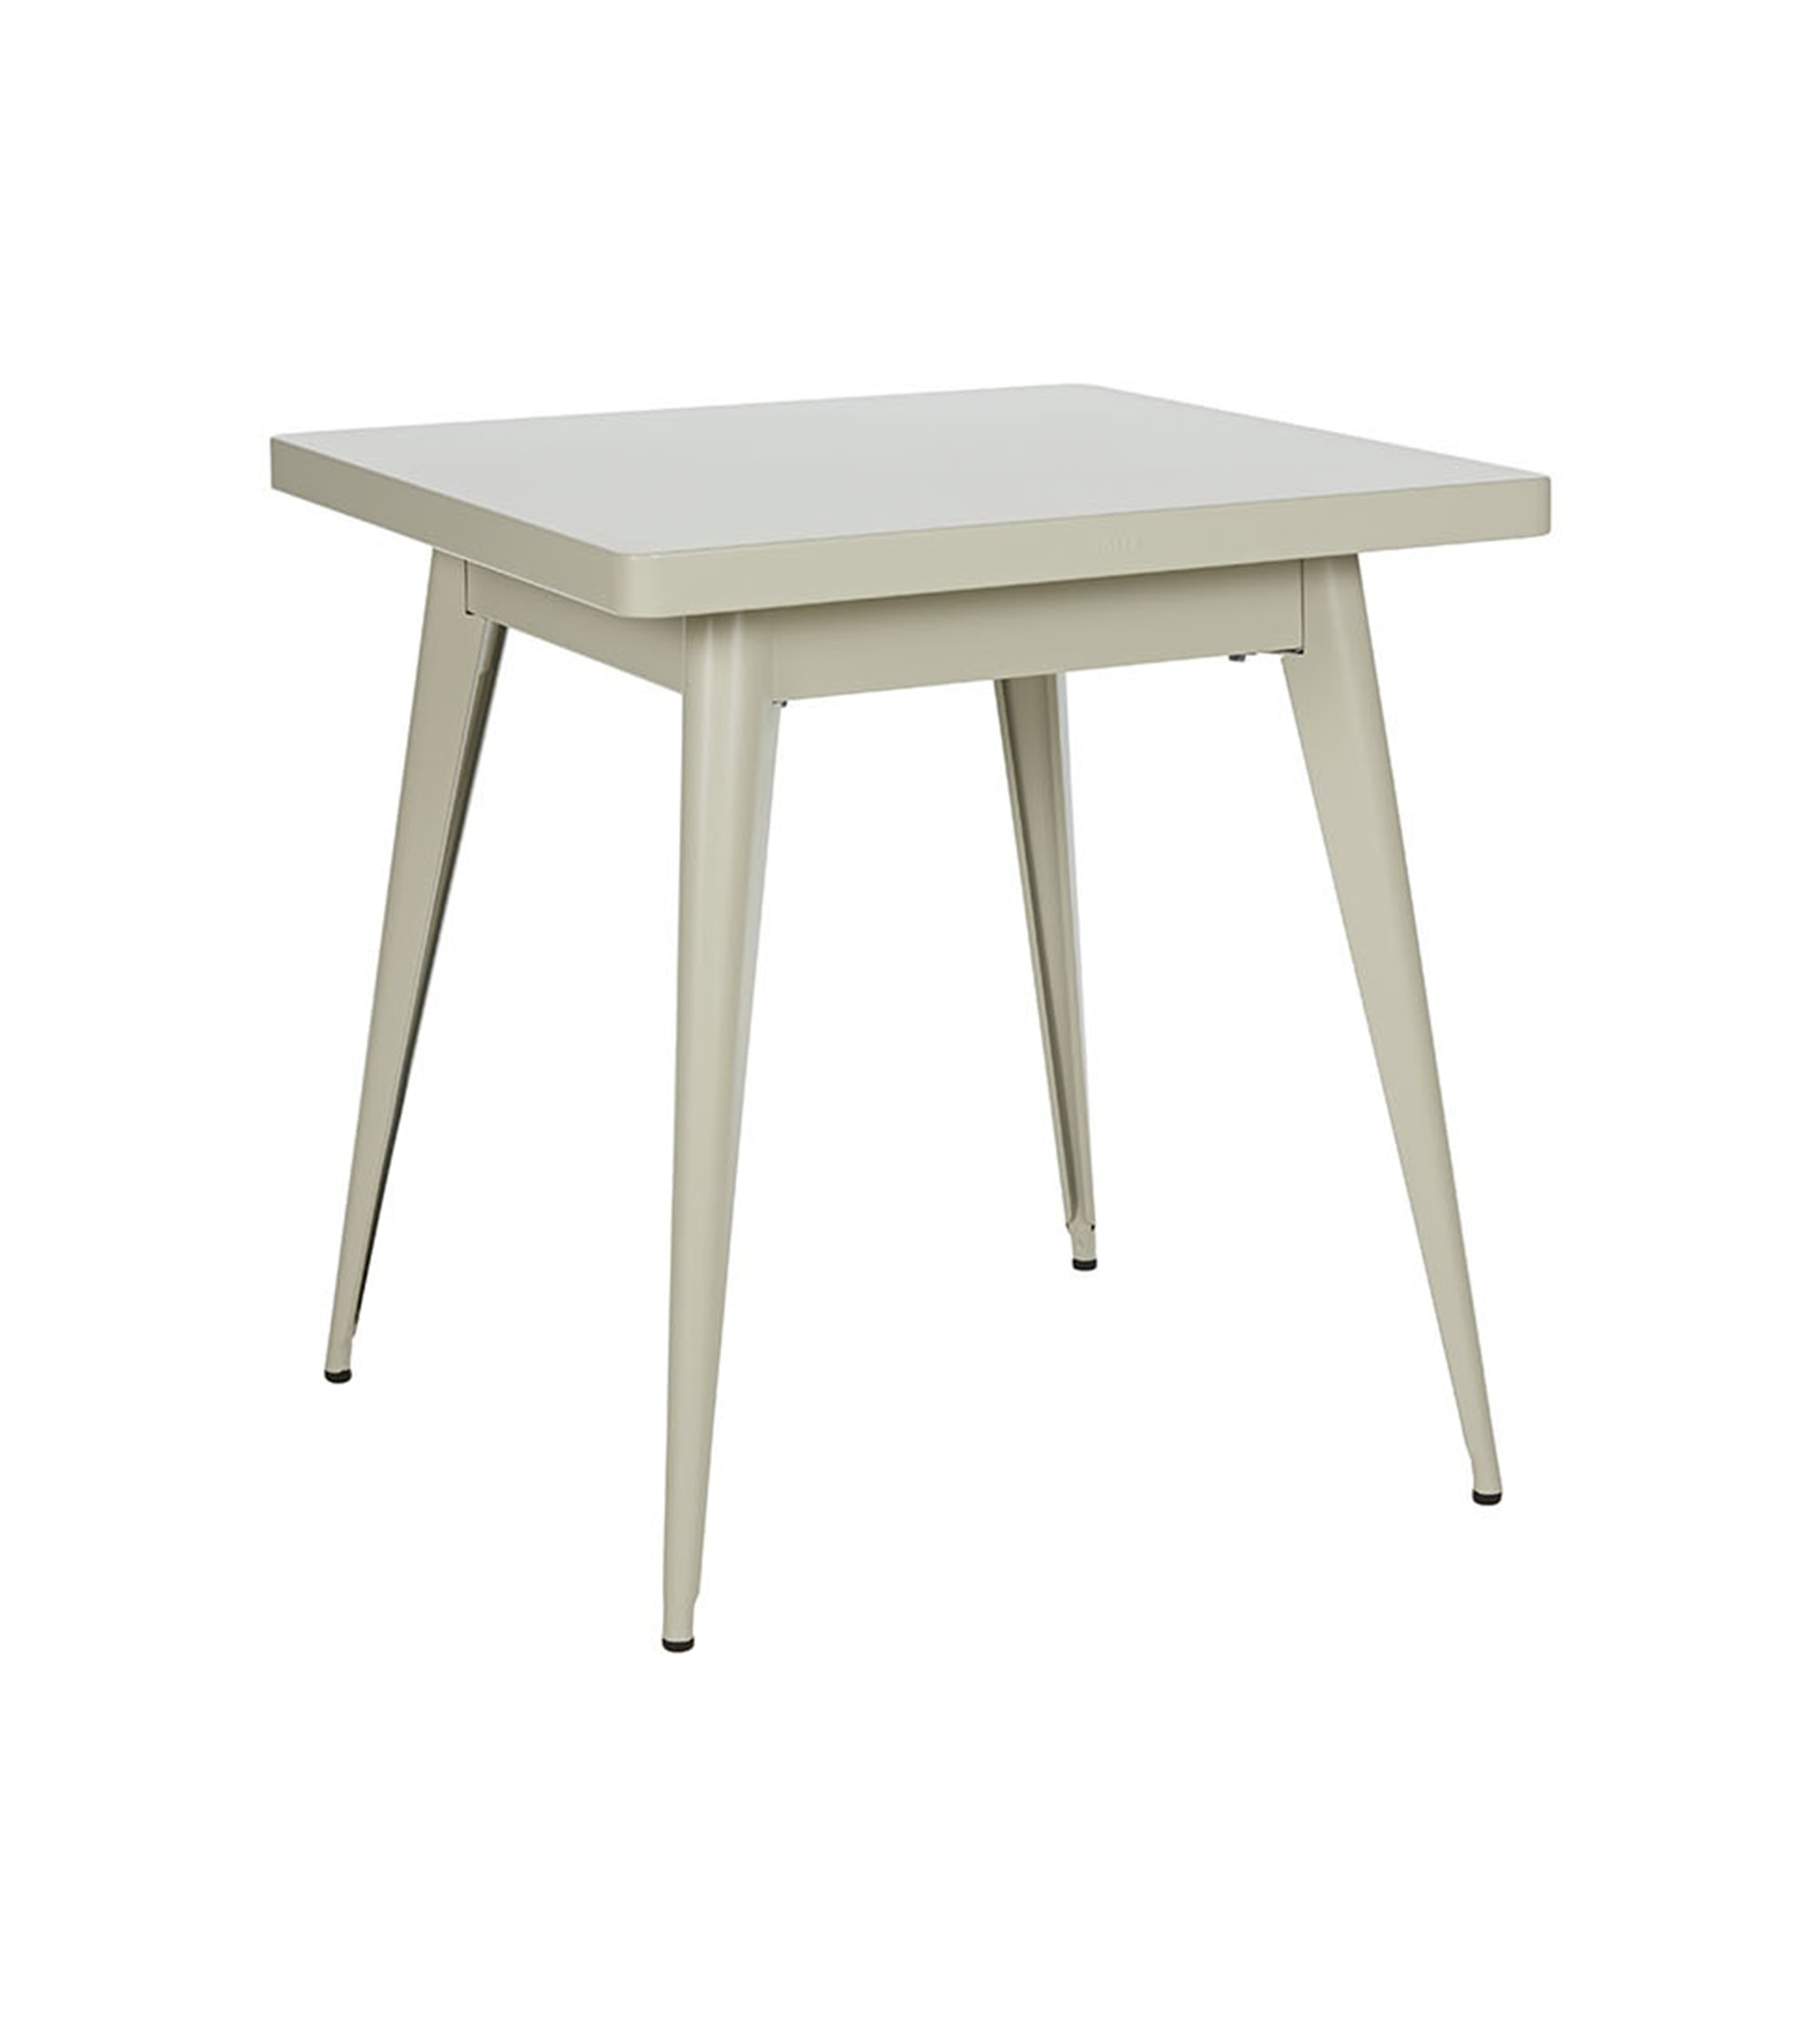 Table 55 - 70x70